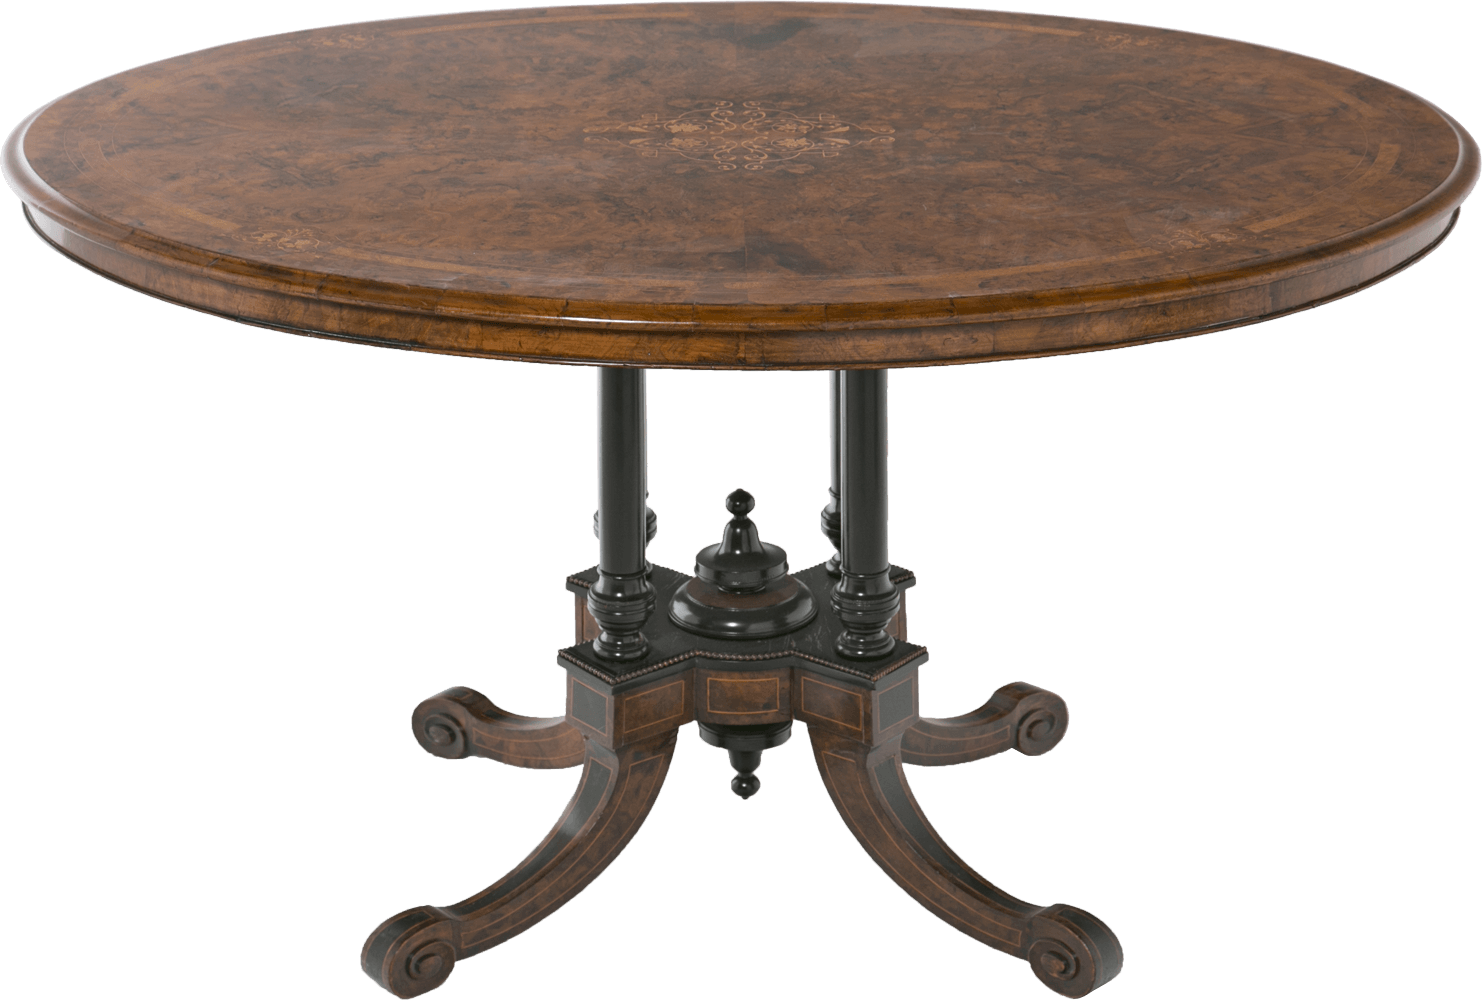 Table Png Transparent Image - Table, Transparent background PNG HD thumbnail